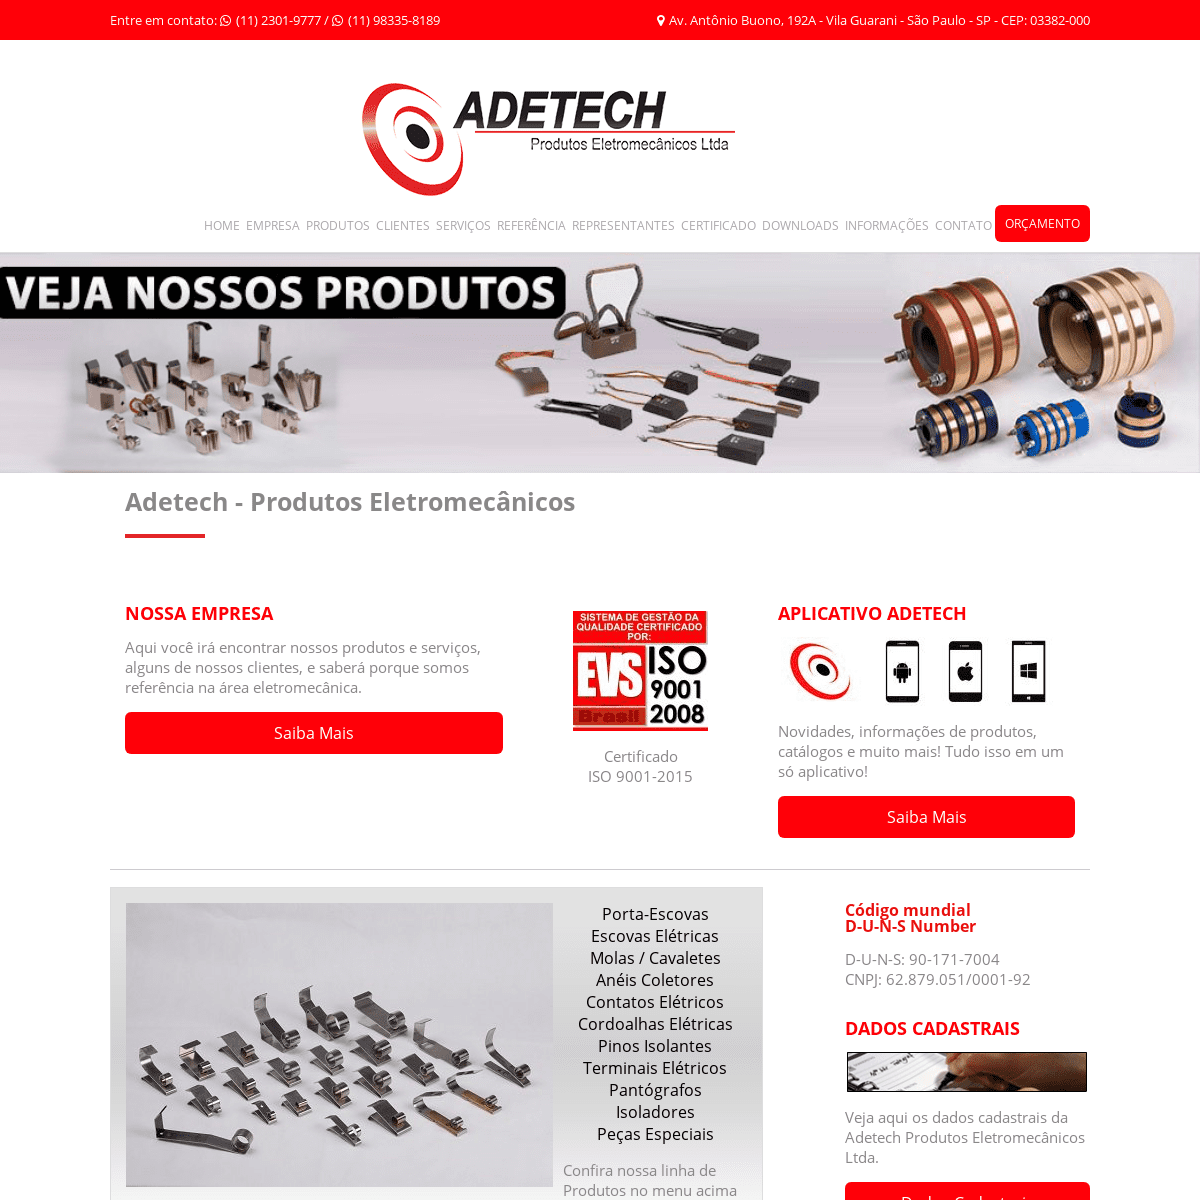 A complete backup of adetech.com.br